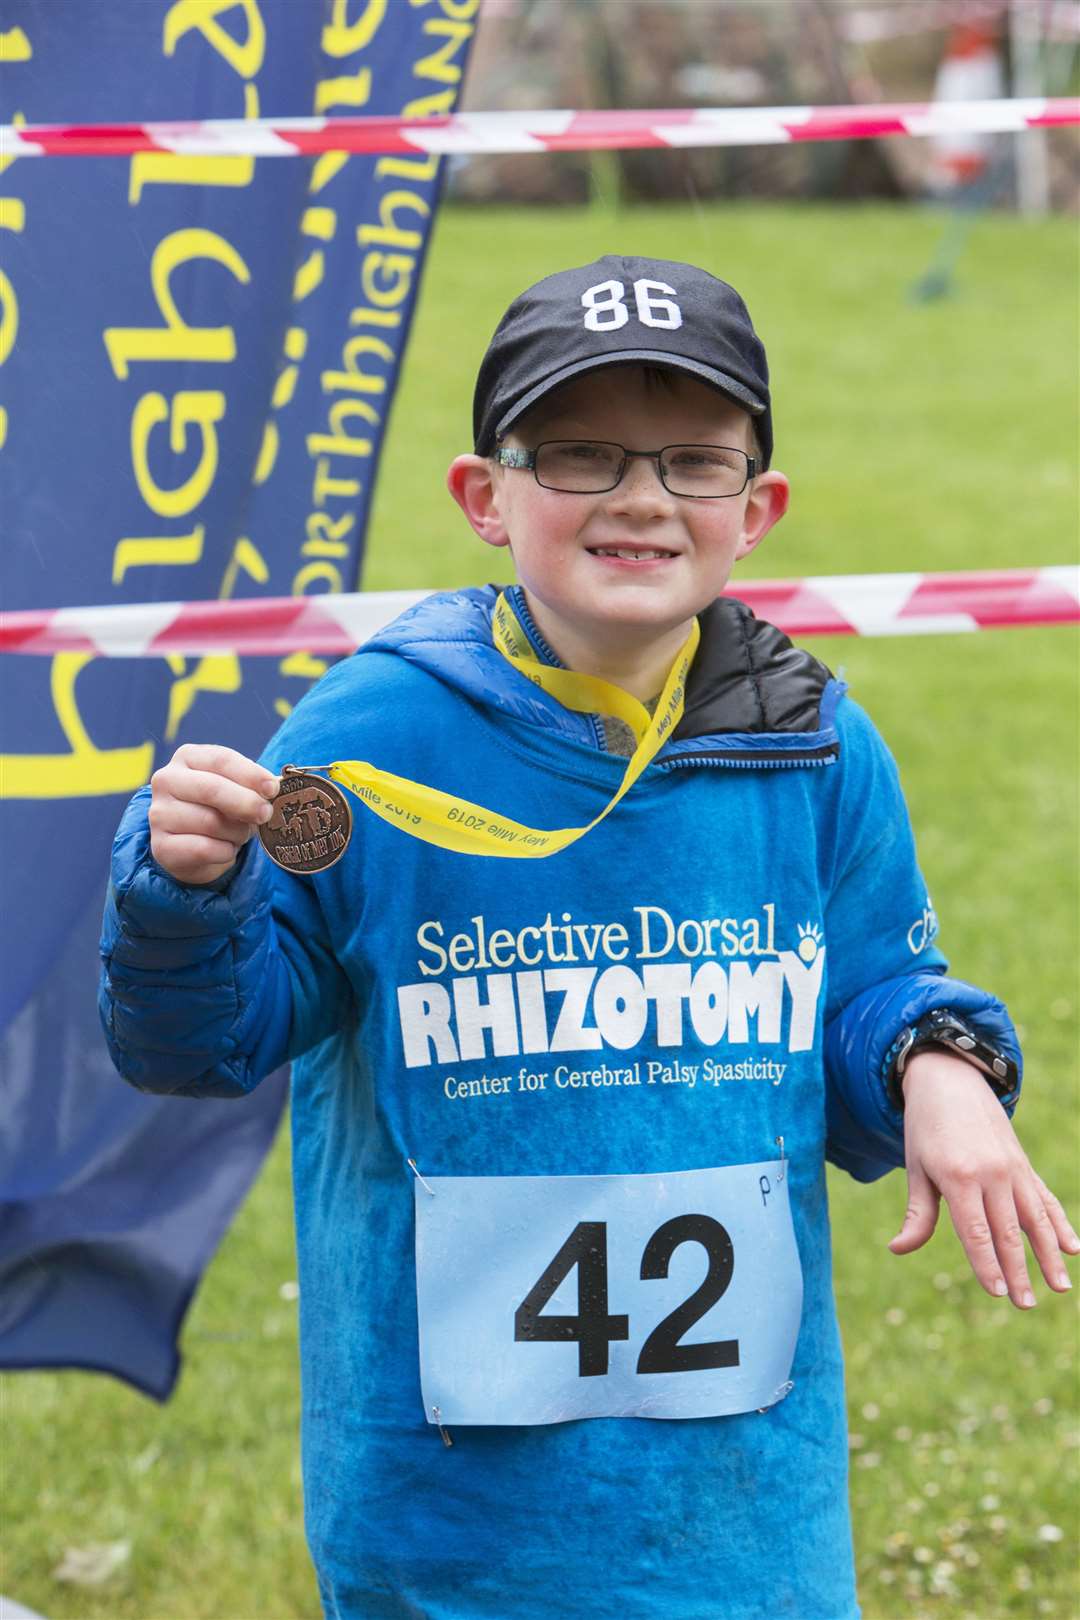 After taking part in the Mey Mile run/walk, Kayden Malcolm proudly displays his medal. Picture: Robert MacDonald / Northern Studios